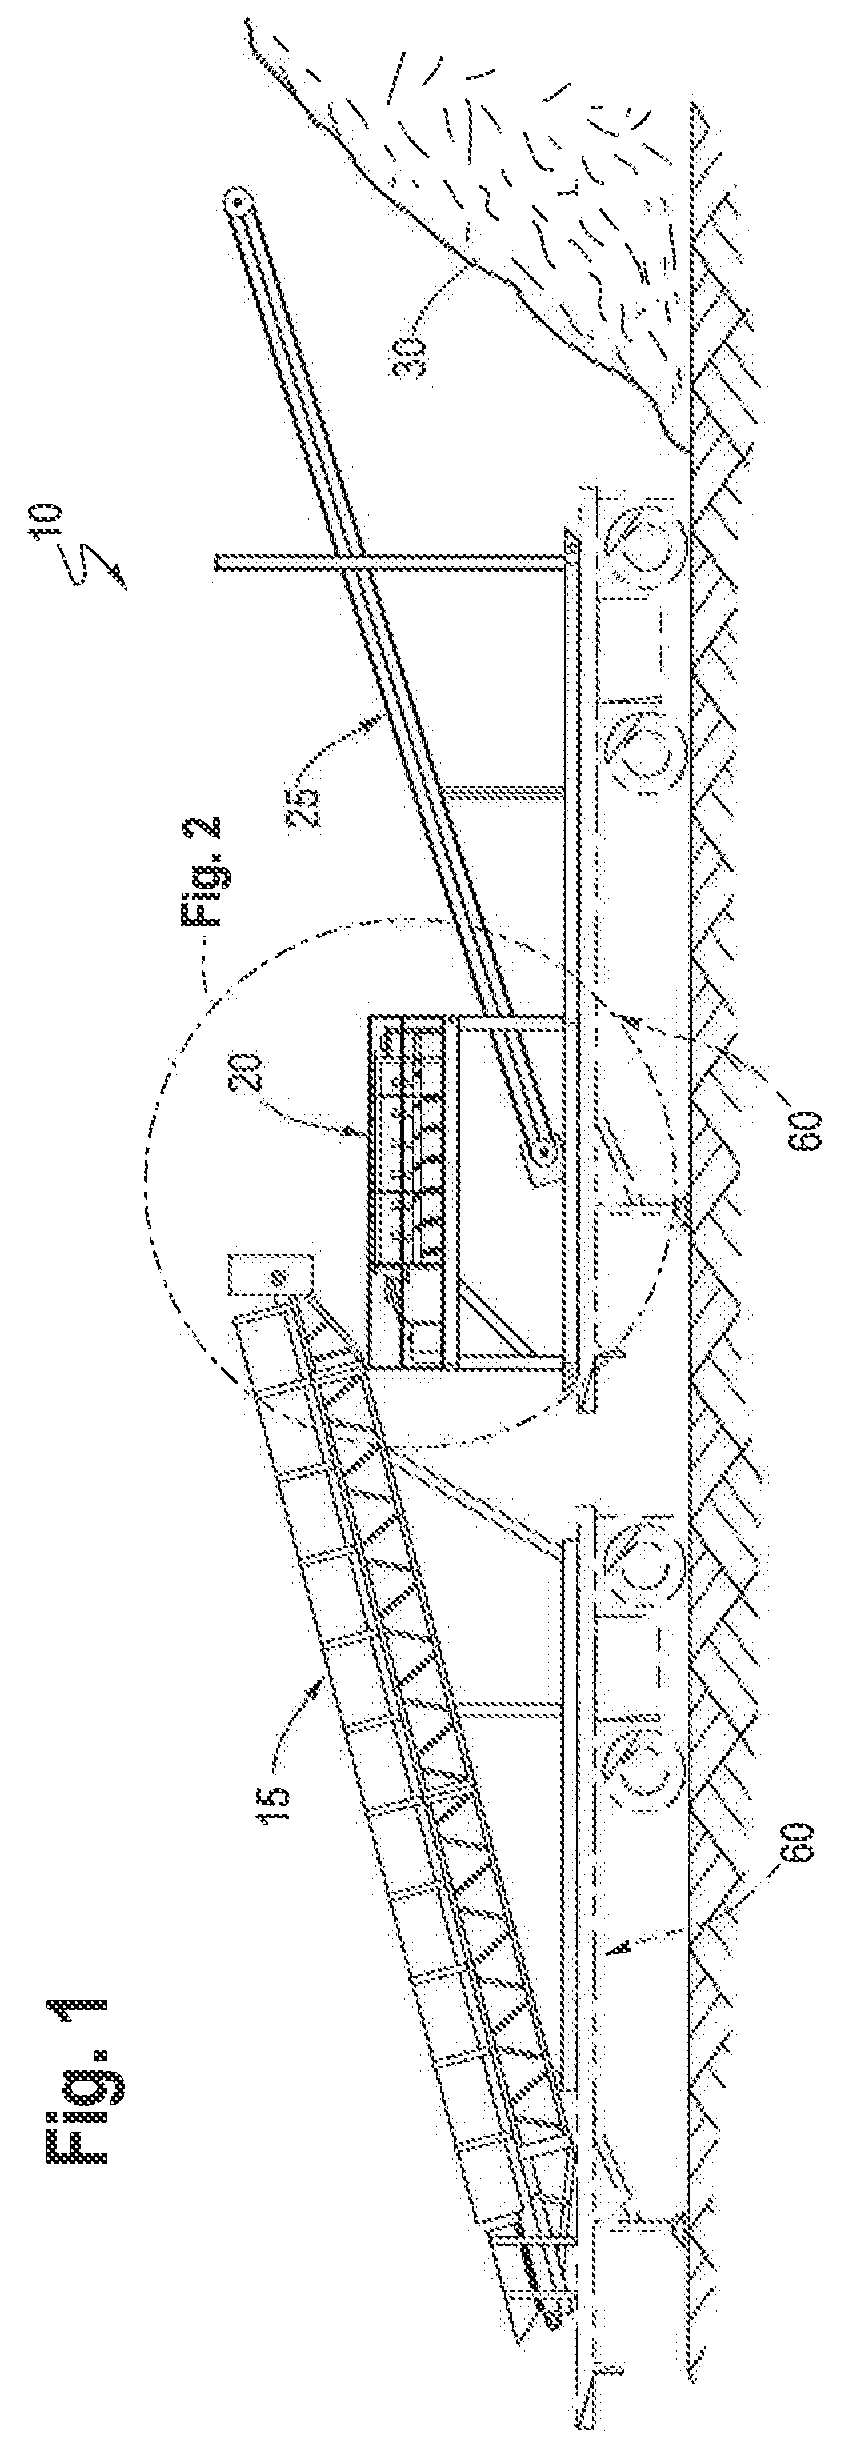 Portable system and method for processing waste to be placed in landfill